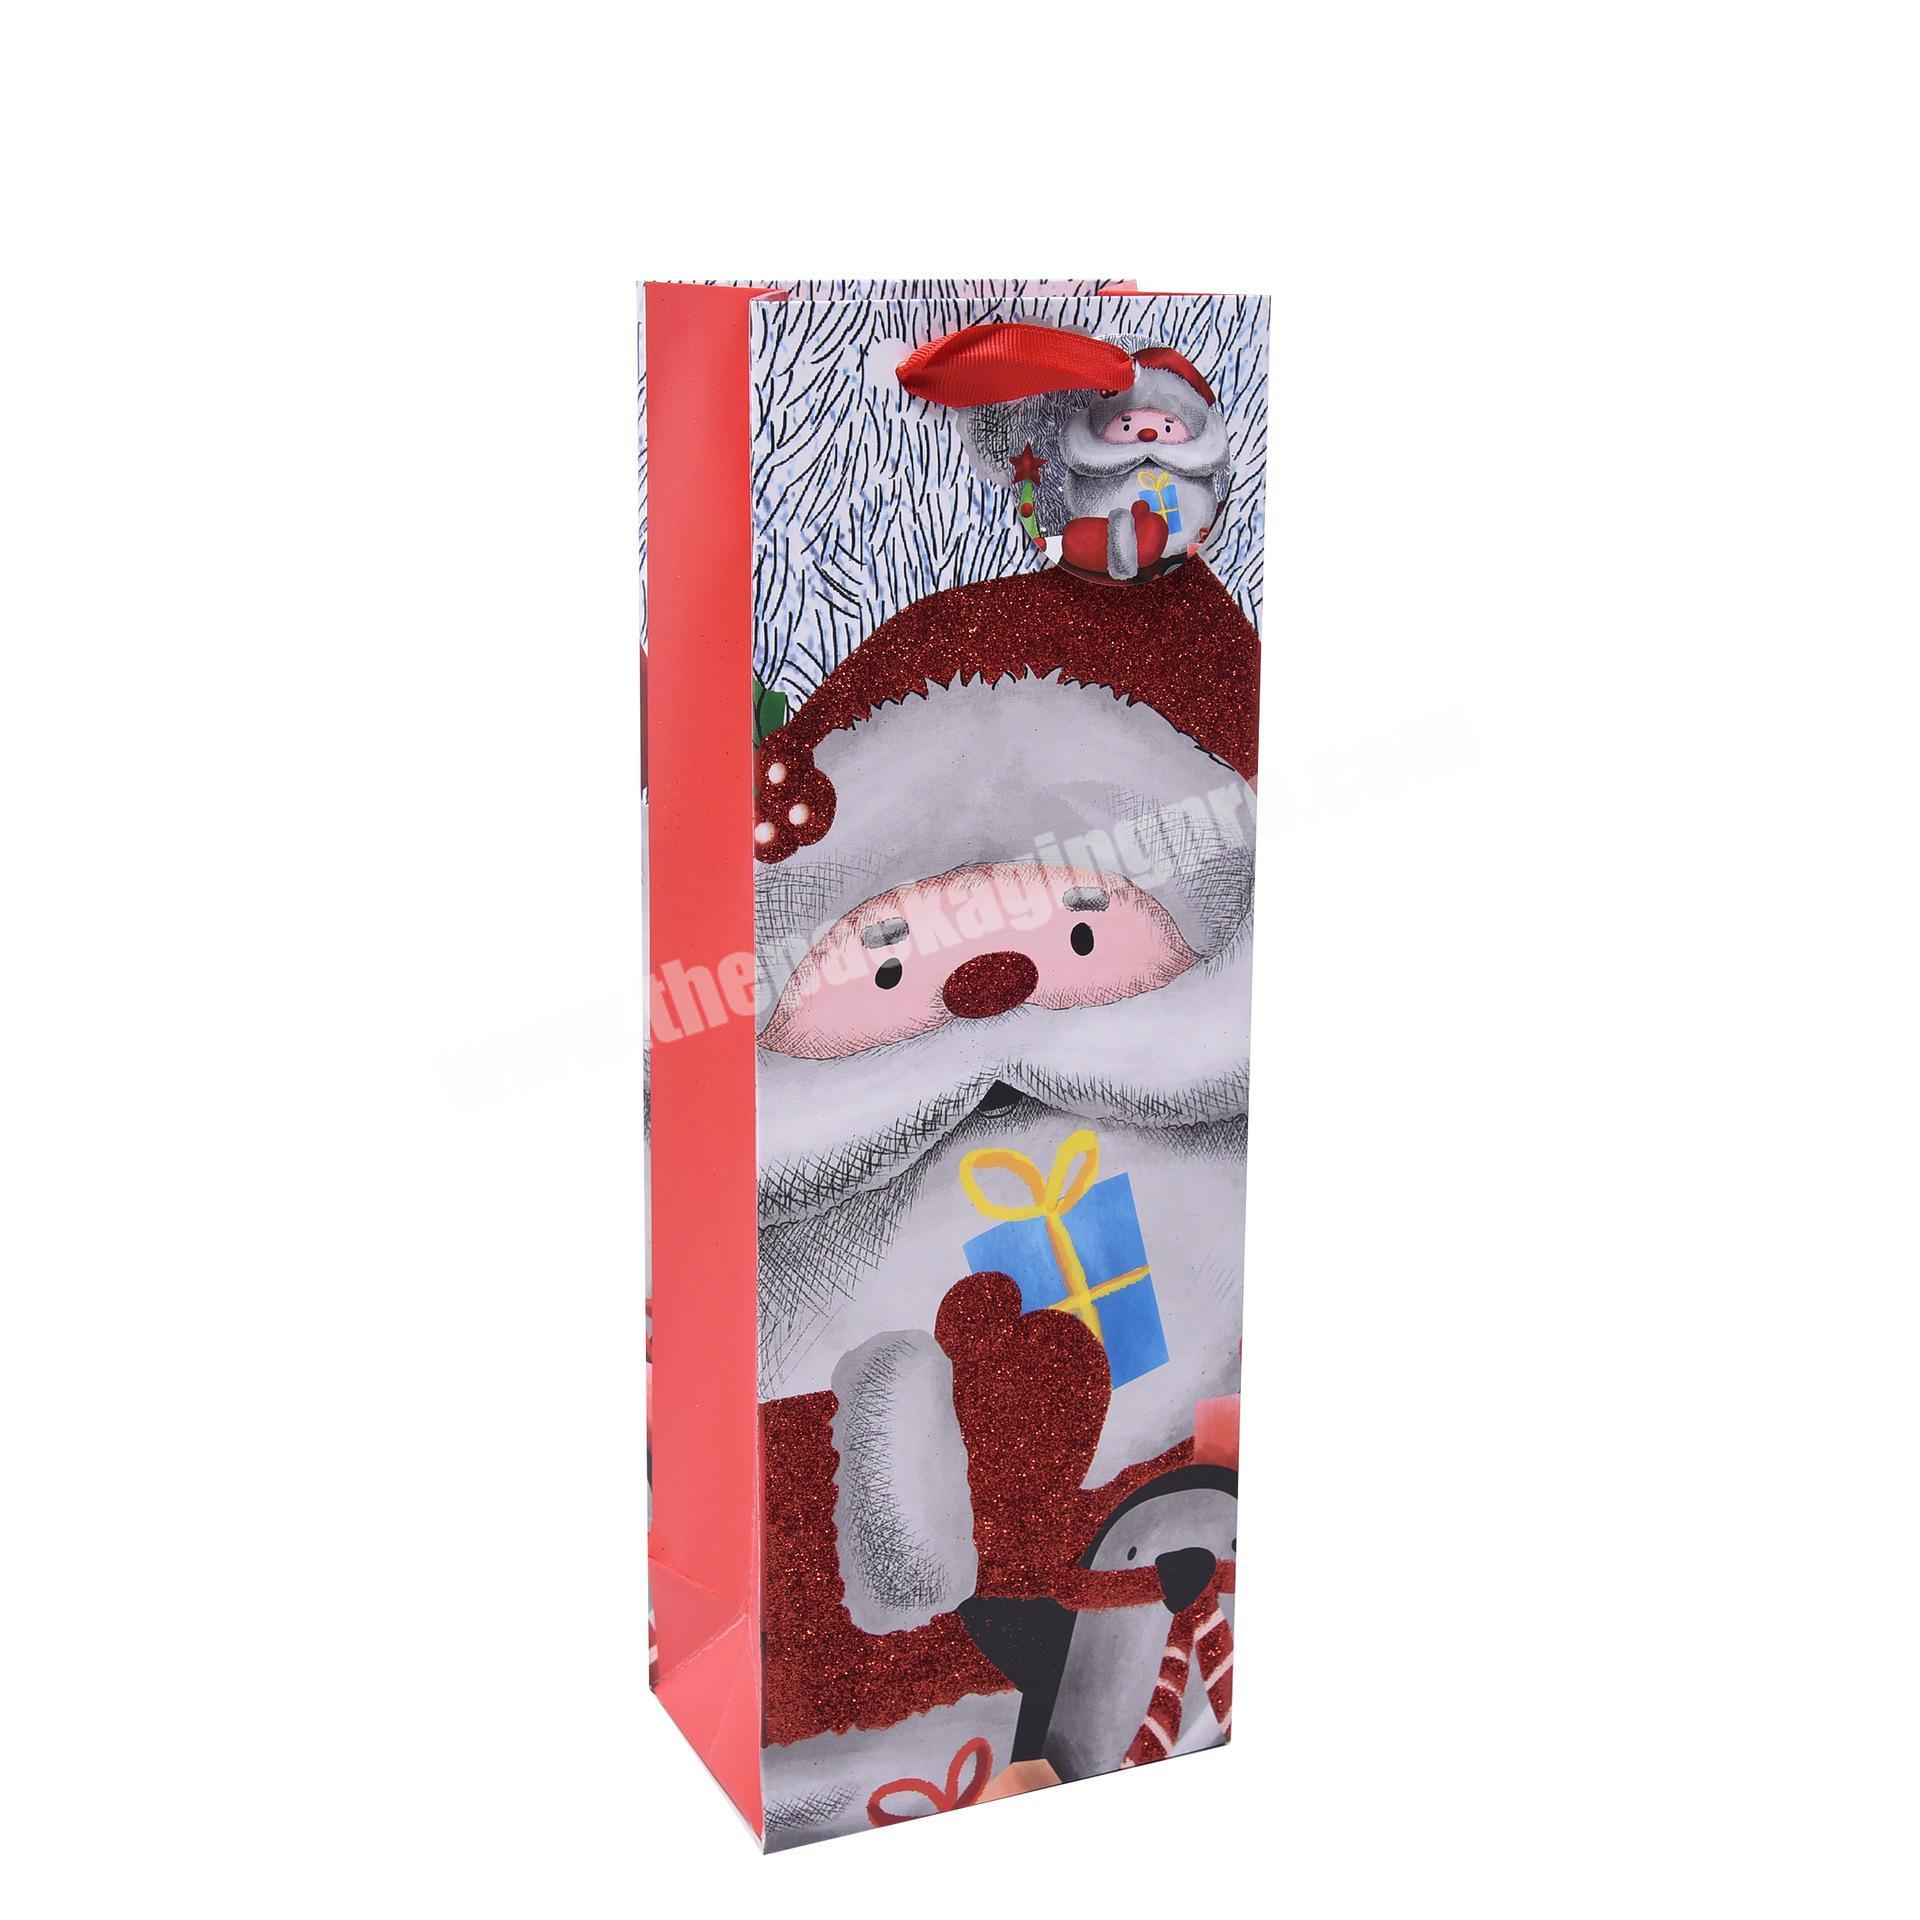 Newest custom Christmas gift packaging bags kraft paper bags a variety of red paper bags